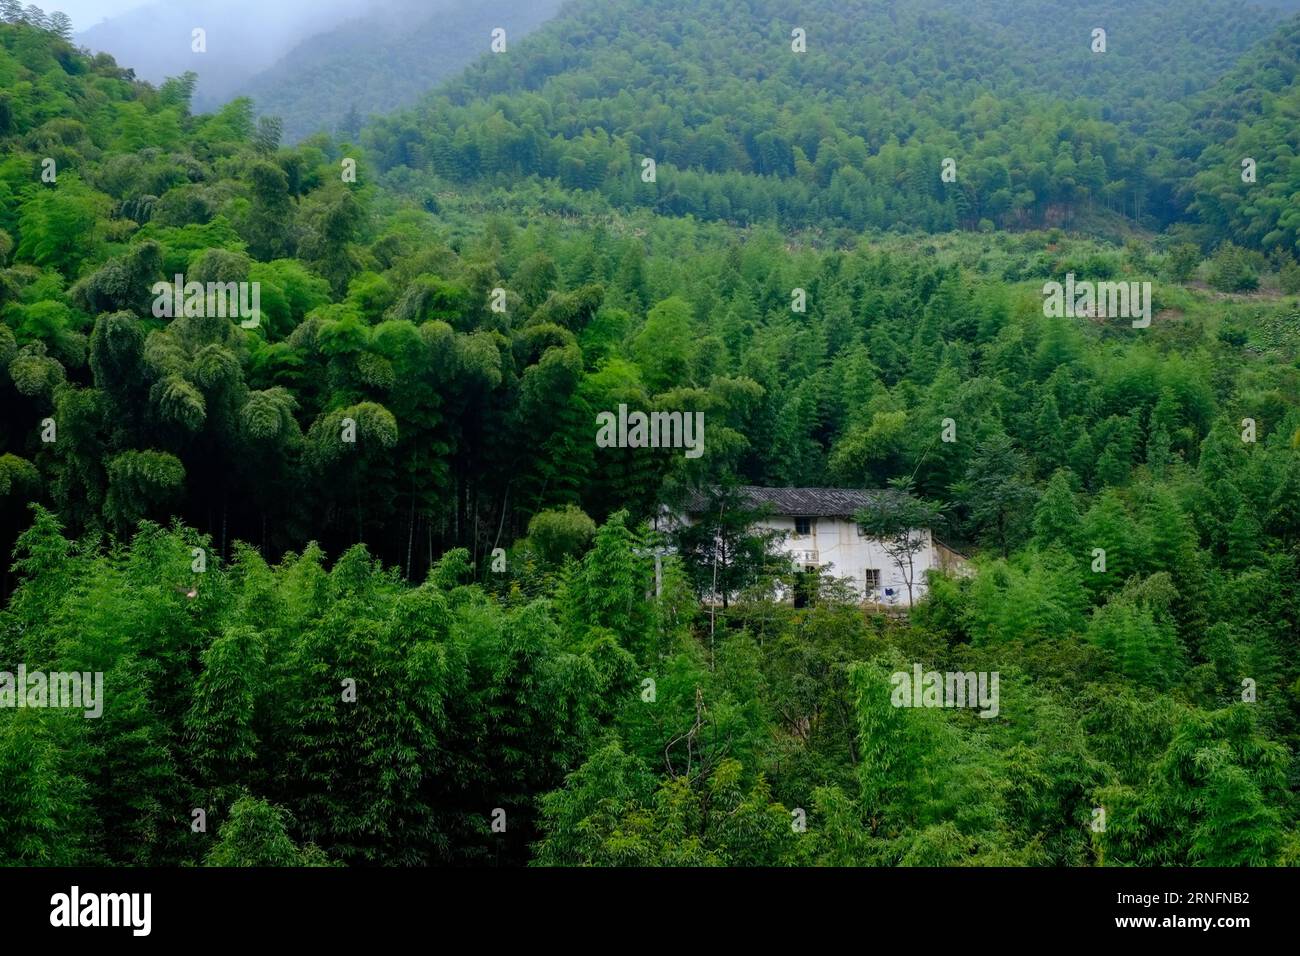 (160817) -- ZHEJIANG, Aug. 17, 2016 -- A house is hidden in a bamboo grove in Daijiashan Village of Tonglu County in east China s Zhejiang Province, Aug. 7, 2016. Many picturesque villages tucked away in Zhejiang s mountainous area have centuries of history and abundant cultural traditions, waiting to be unveiled. ) (wx) CHINA-ZHEJIANG-VILLAGES-SCENERY (CN) ZhangxCheng PUBLICATIONxNOTxINxCHN   160817 Zhejiang Aug 17 2016 a House IS Hidden in a Bamboo Grove in  Village of Tonglu County in East China S Zhejiang Province Aug 7 2016 MANY picturesque Villages tucked Away in Zhejiang S mountainous A Stock Photo